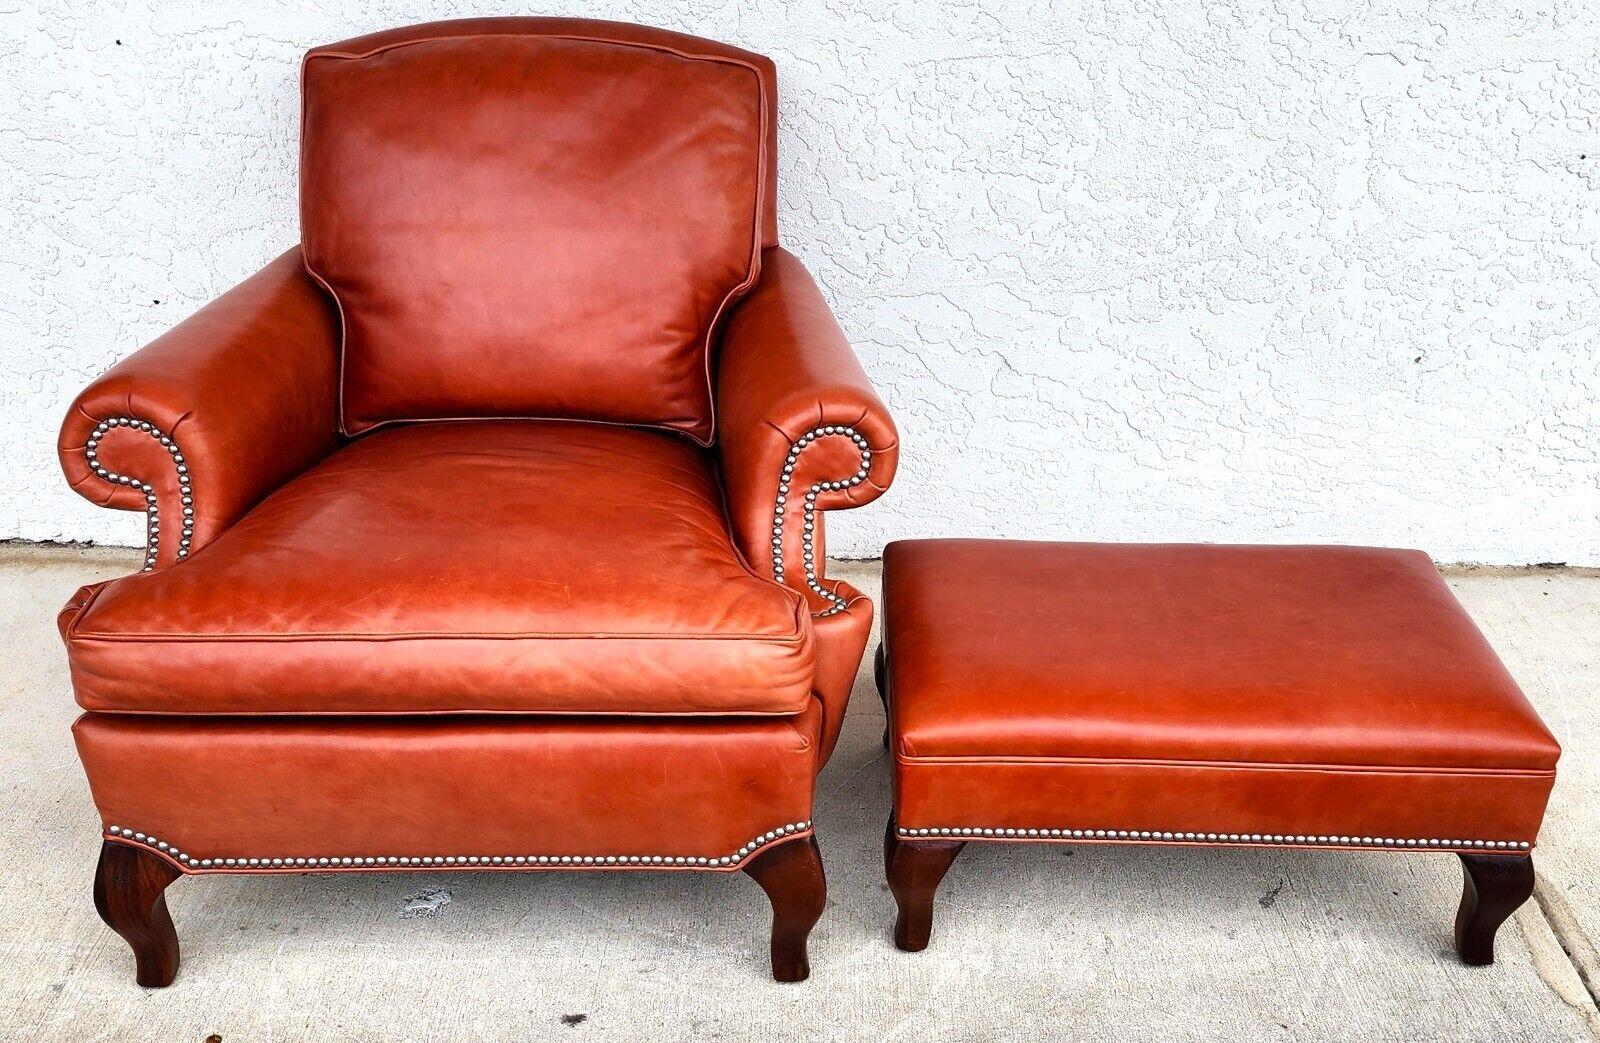 For FULL item description click on CONTINUE READING at the bottom of this page.

Offering One Of Our Recent Palm Beach Estate Fine Furniture Acquisitions Of A
Classic Highly Stylized Top Grain Leather Low Profile Lounge Chair and Ottoman by Hickory